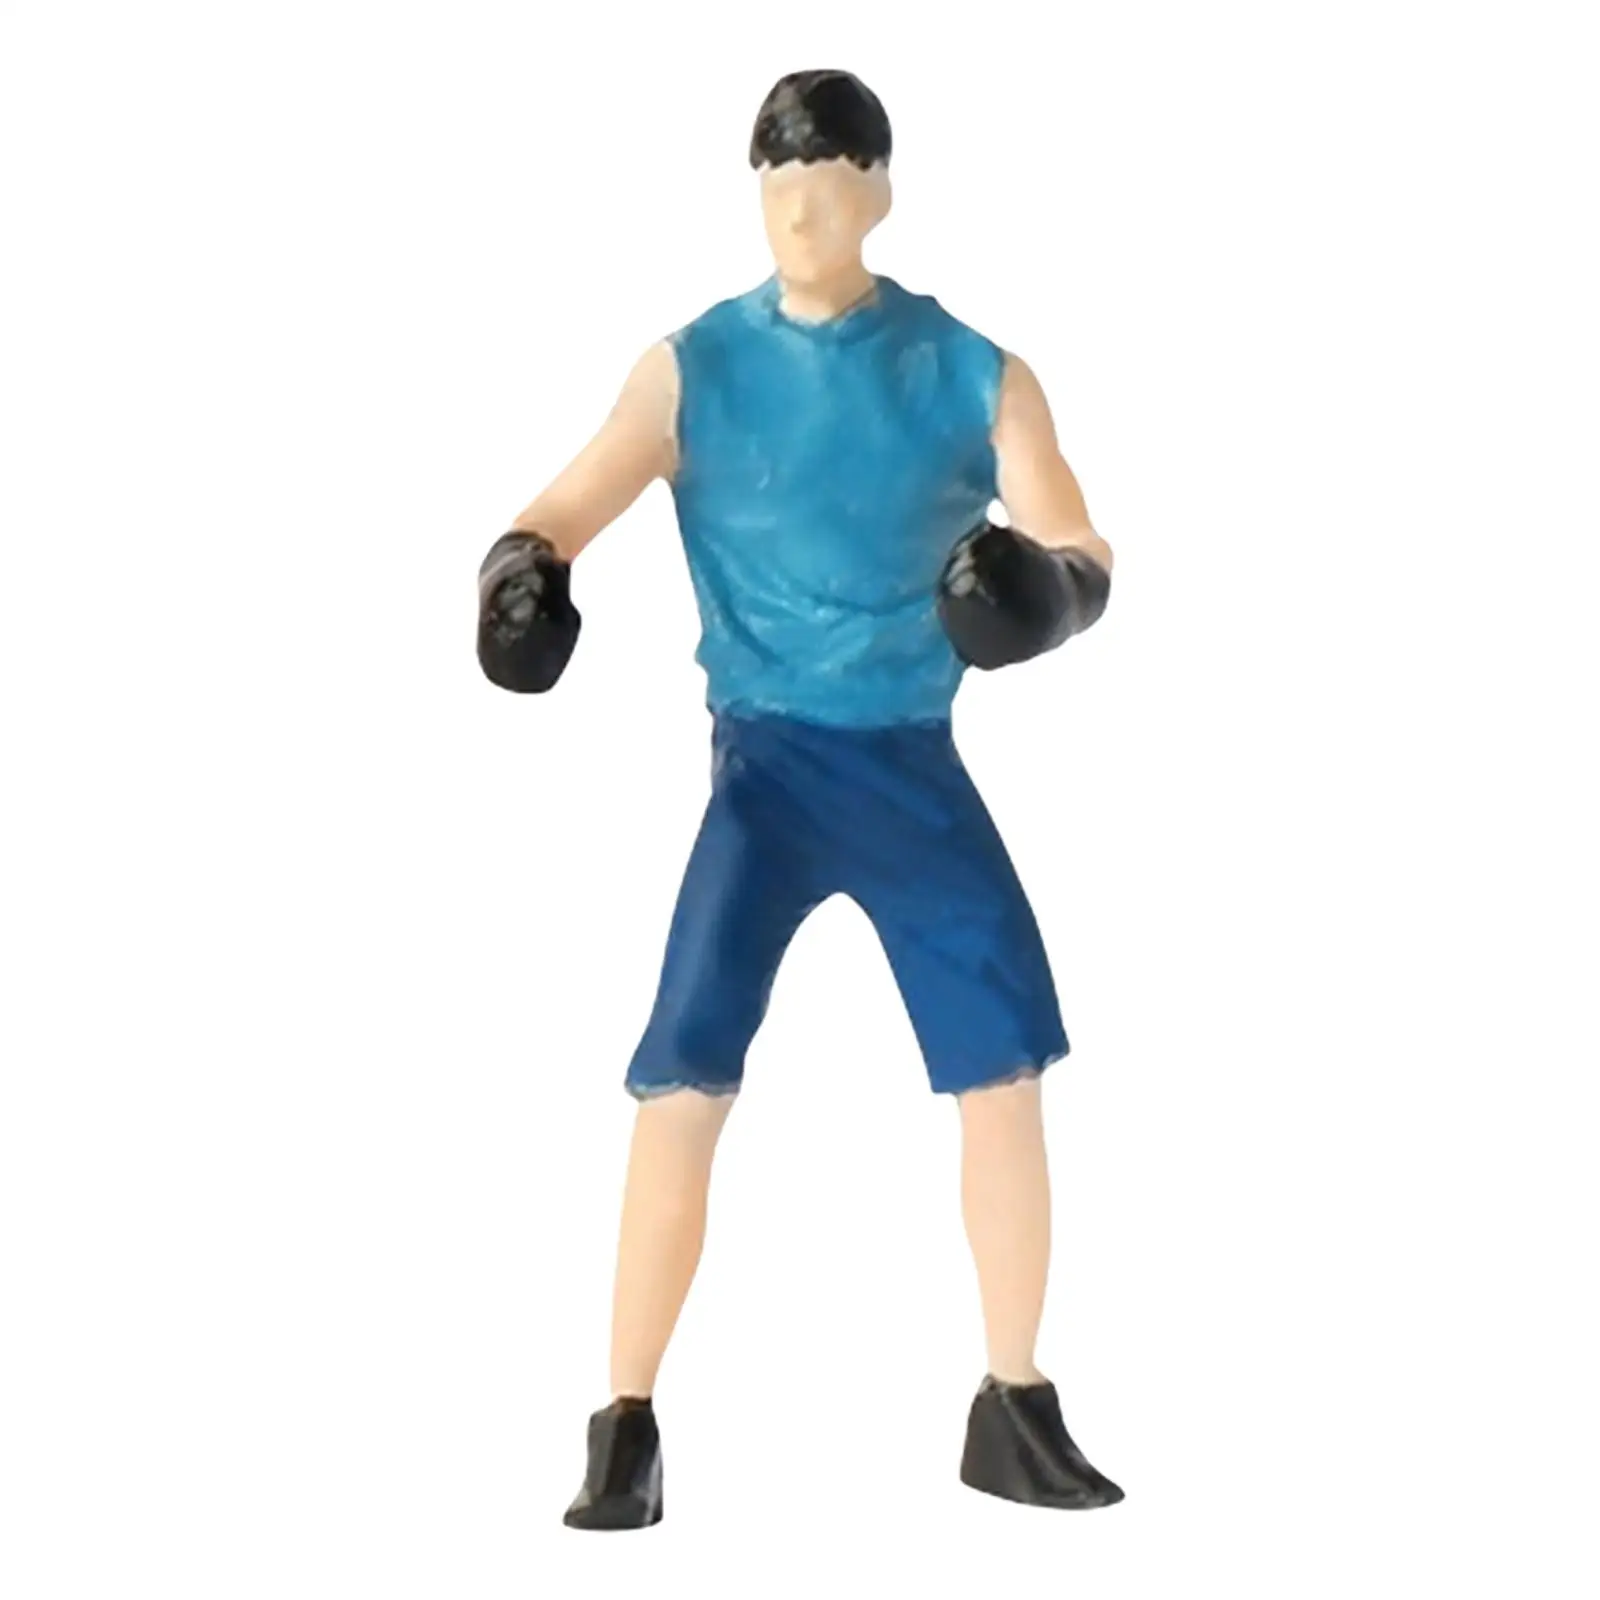 Realistic 1:64 Scale Models Figurine Boxing Man Model Figures Miniature Model Resin Doll Sandtable Decoration for Layout Decor